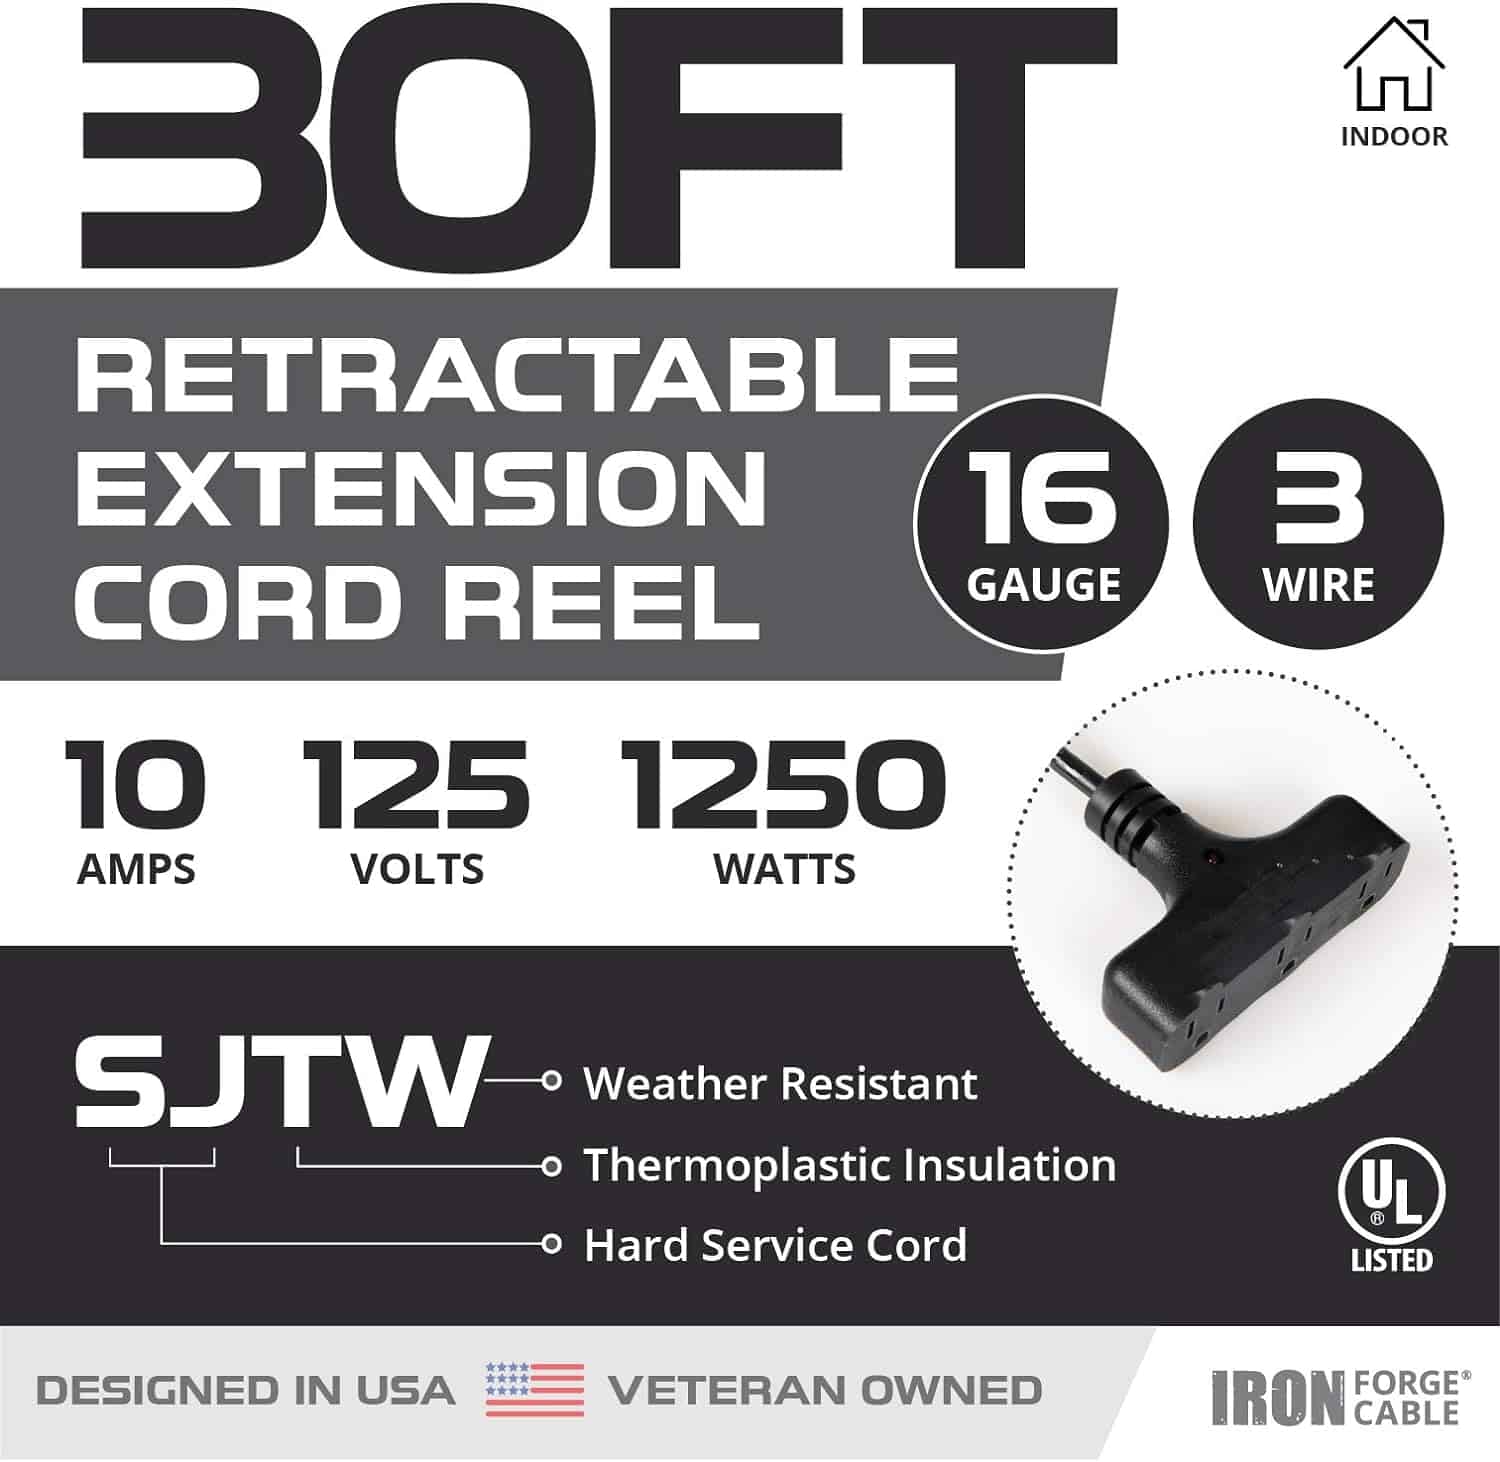 Iron Forge Cable 30 Ft Retractable Extension Cord Reel with Breaker Switch & 3 Outlets Pigtail, Metal Plate Ceiling Wall Mount Hanging Extension Cord Reel 16 3 SJTW Retractable Cable for Garage & Shop 2